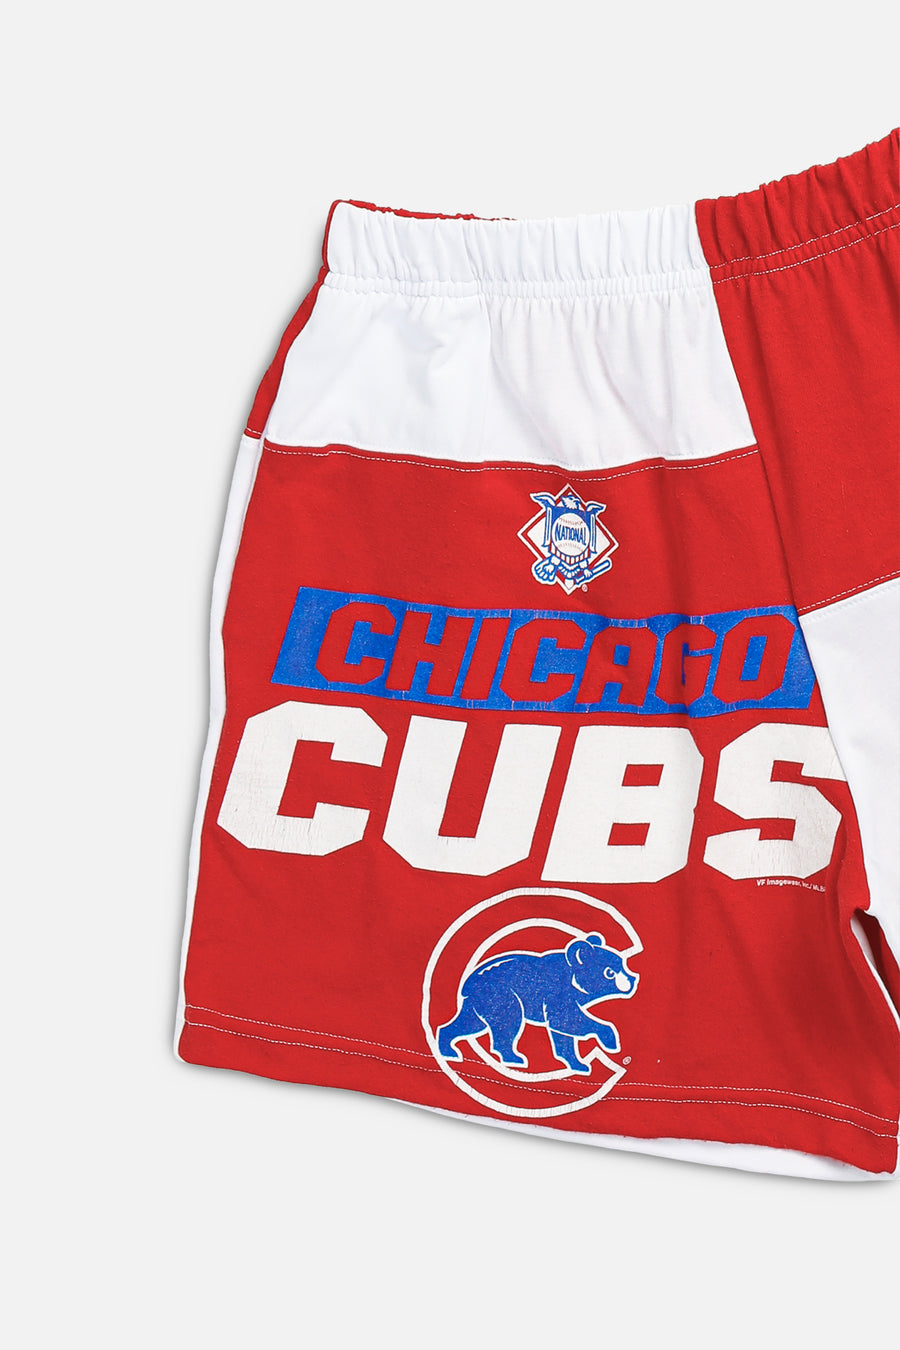 Unisex Rework Chicago Cubs MLB Patchwork Tee Shorts - S